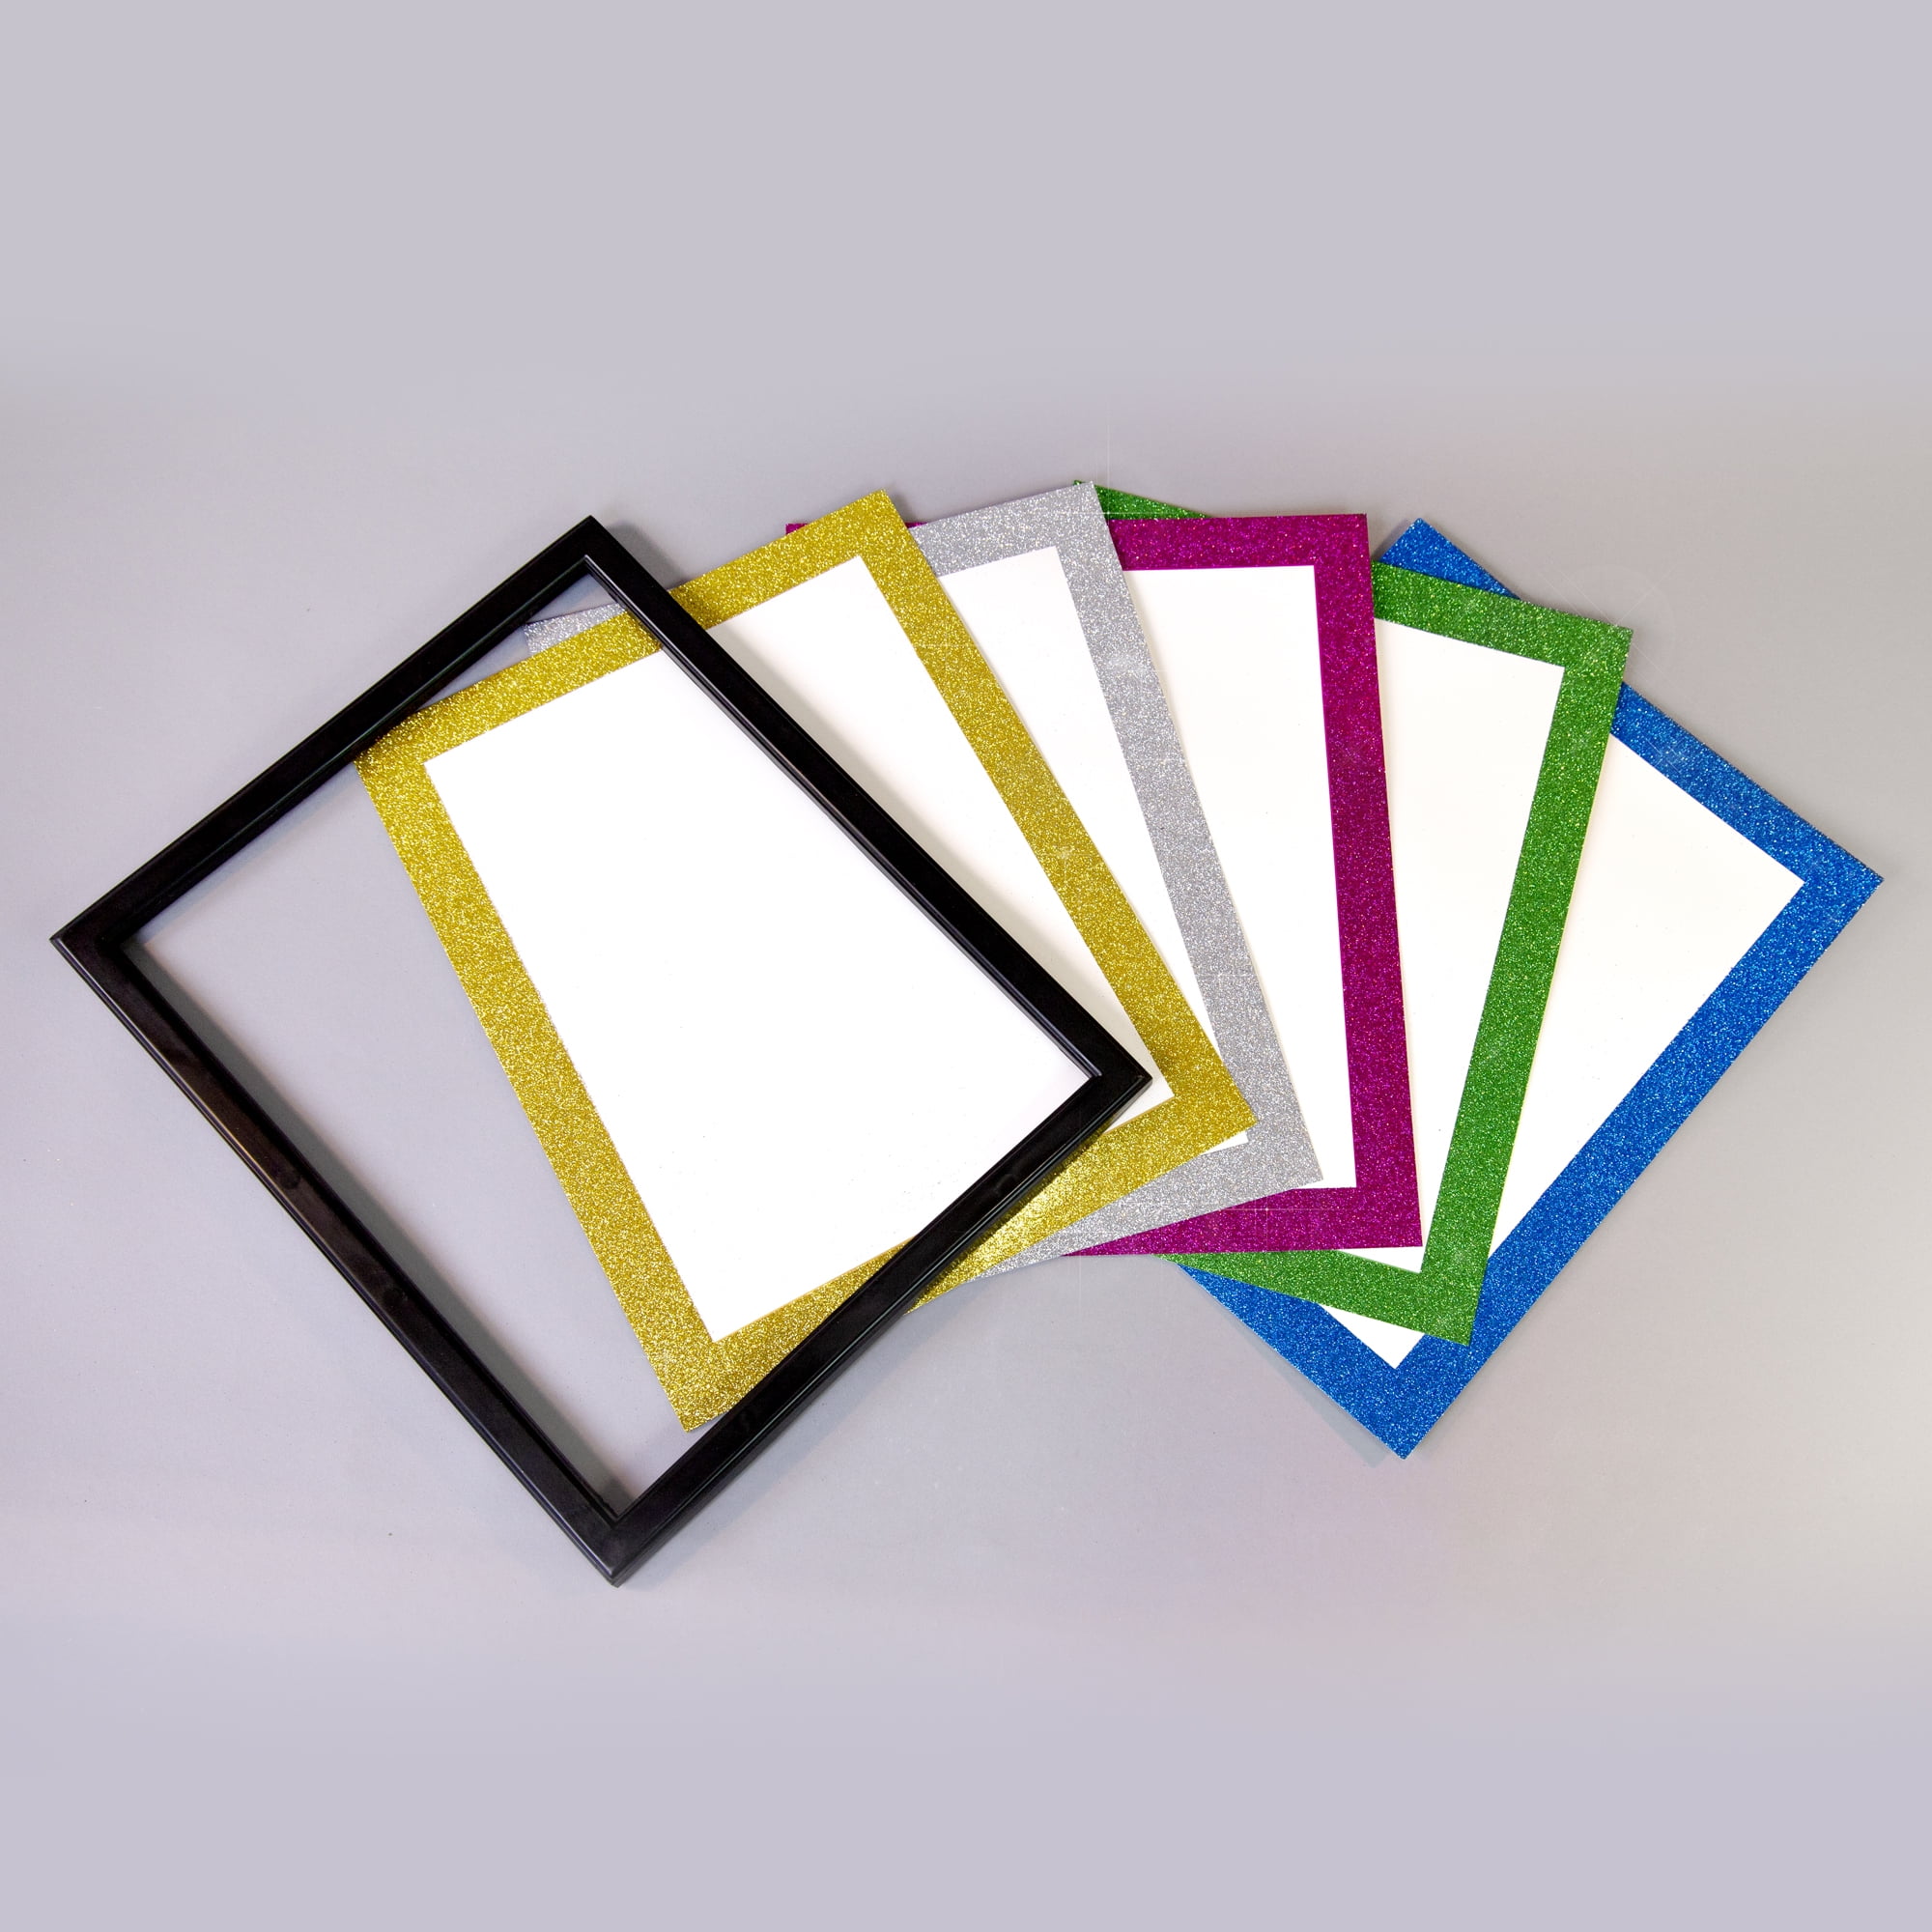 BAZIC Poster Board White Color 11 X 14, Glitter Frame, (5/Pack), 1-Pack 